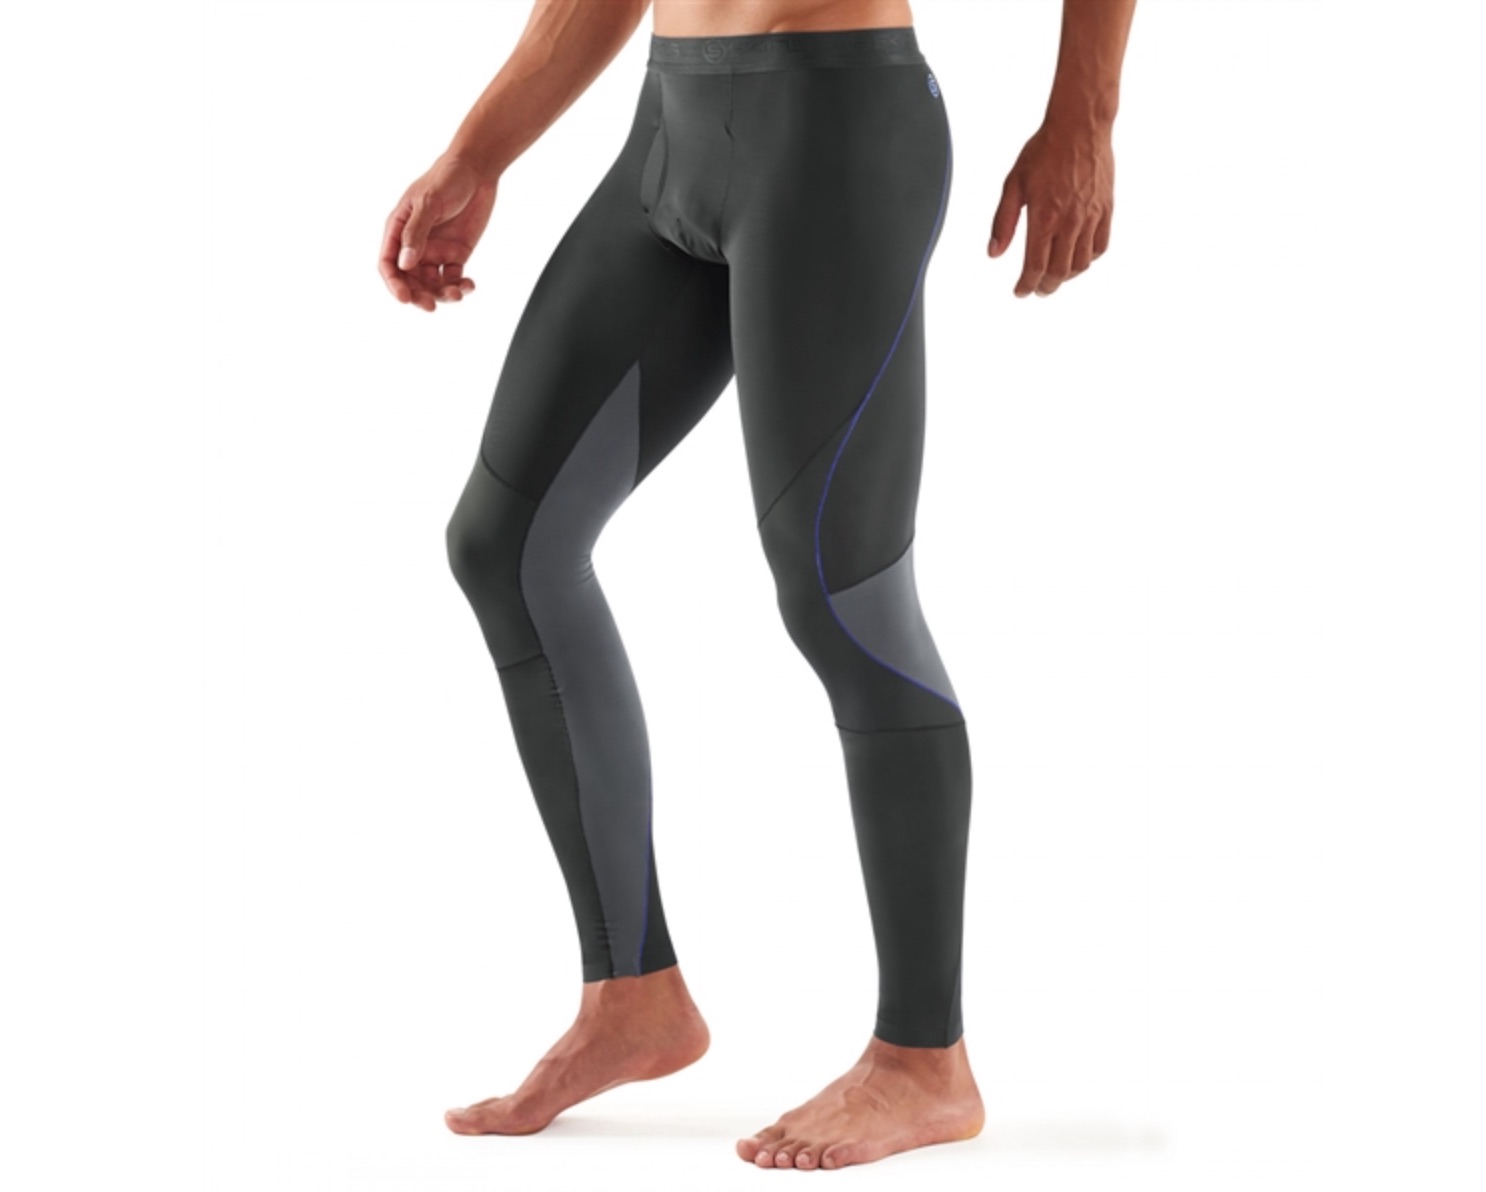 Review: SKINS Men's Recovery Compression Tights